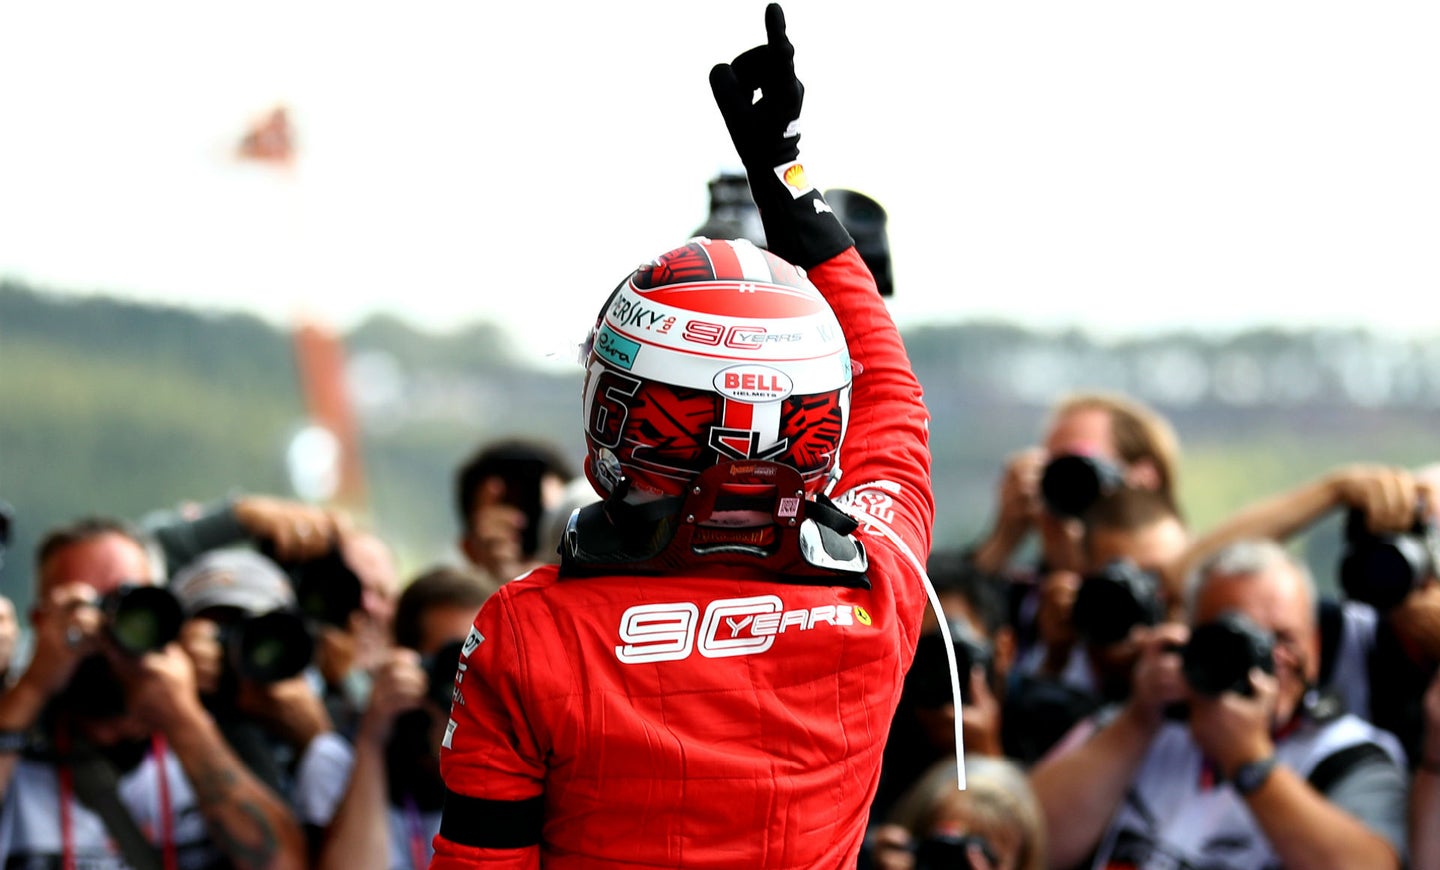 Charles Leclerc Claims Inaugural Formula 1 Victory at Spa in Emotional Tribute to Fallen Racer